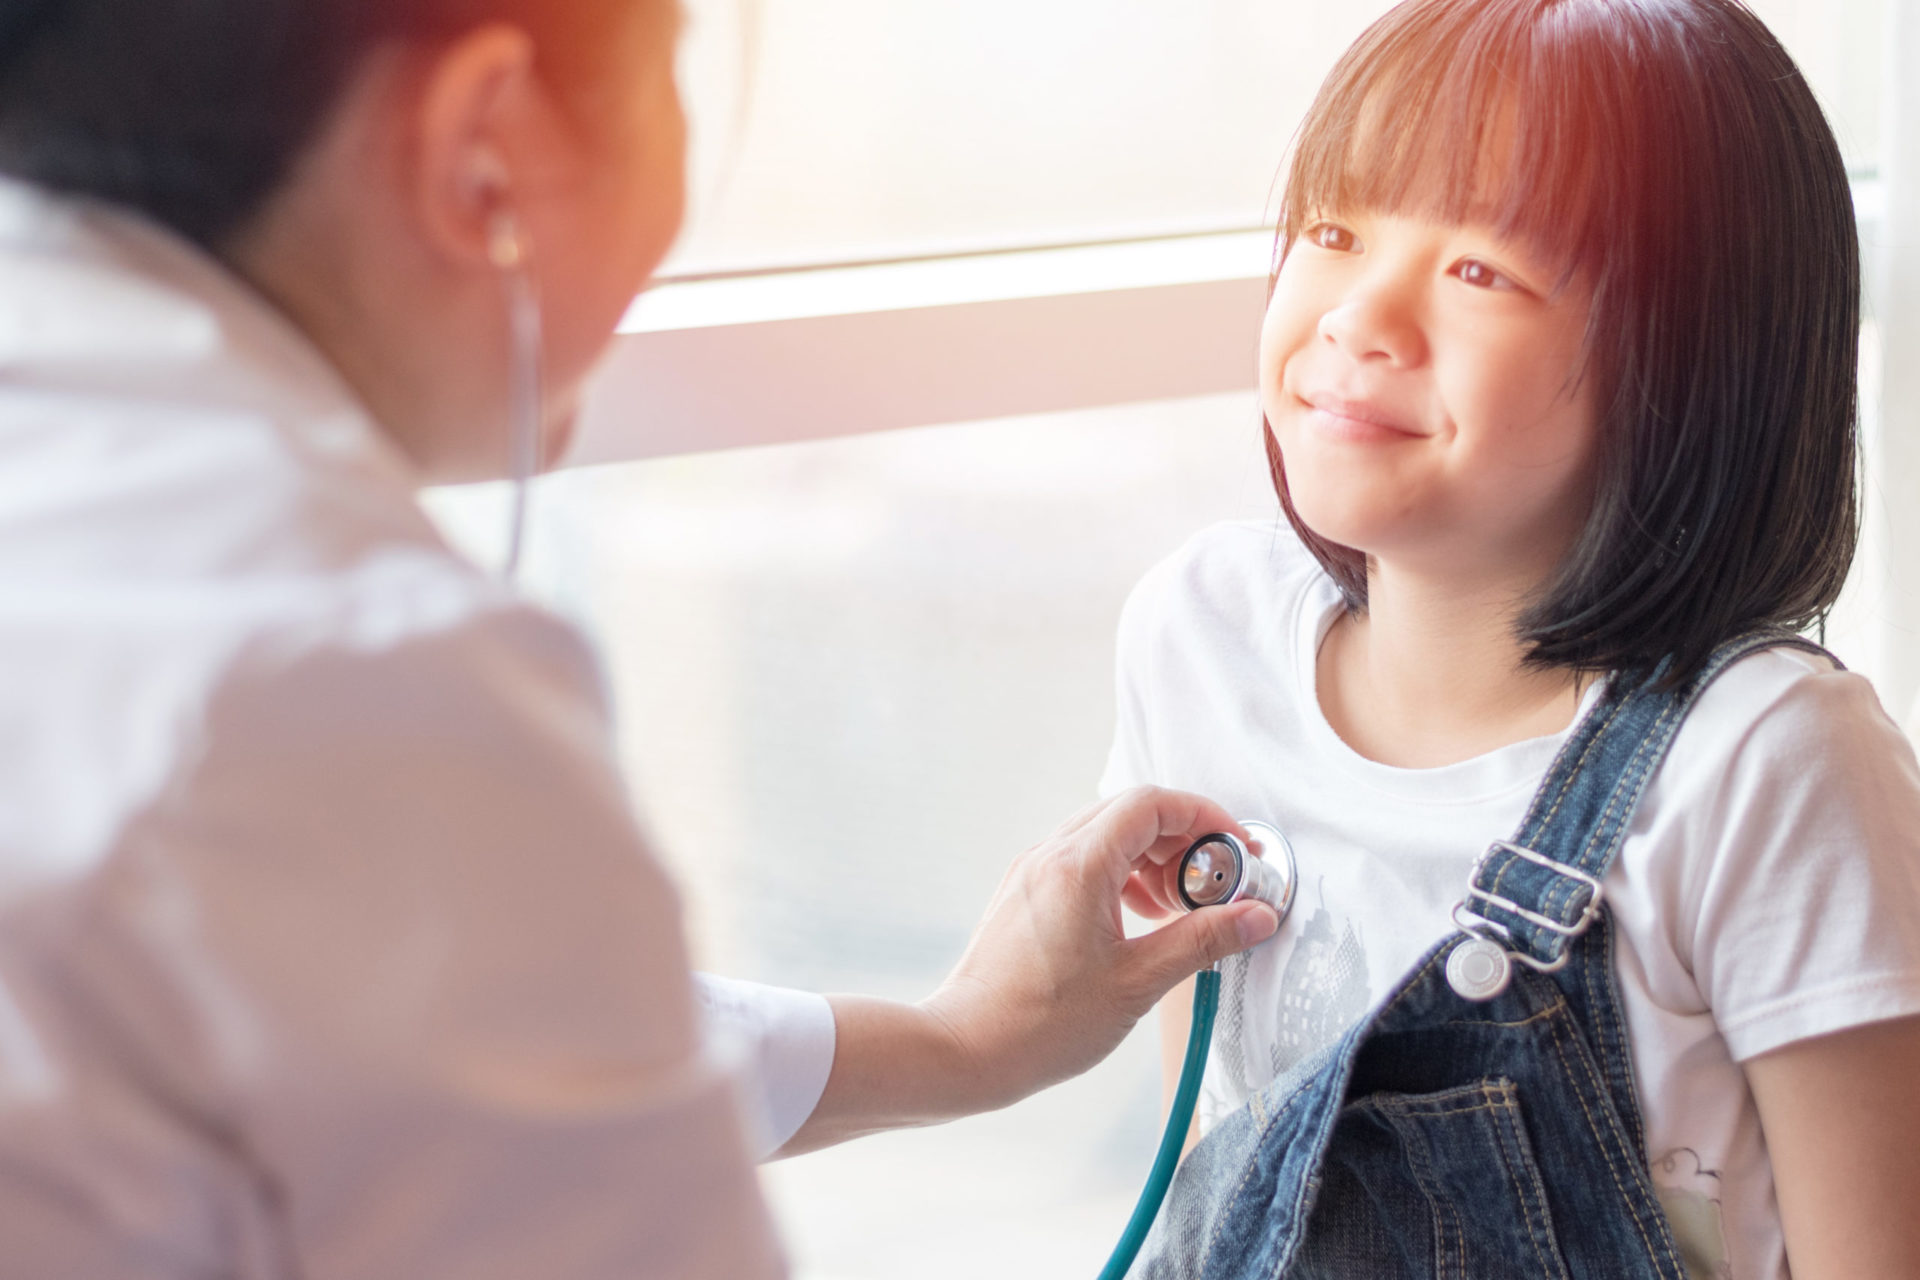 Doctor takes a young girls heartbeat with a stethoscope